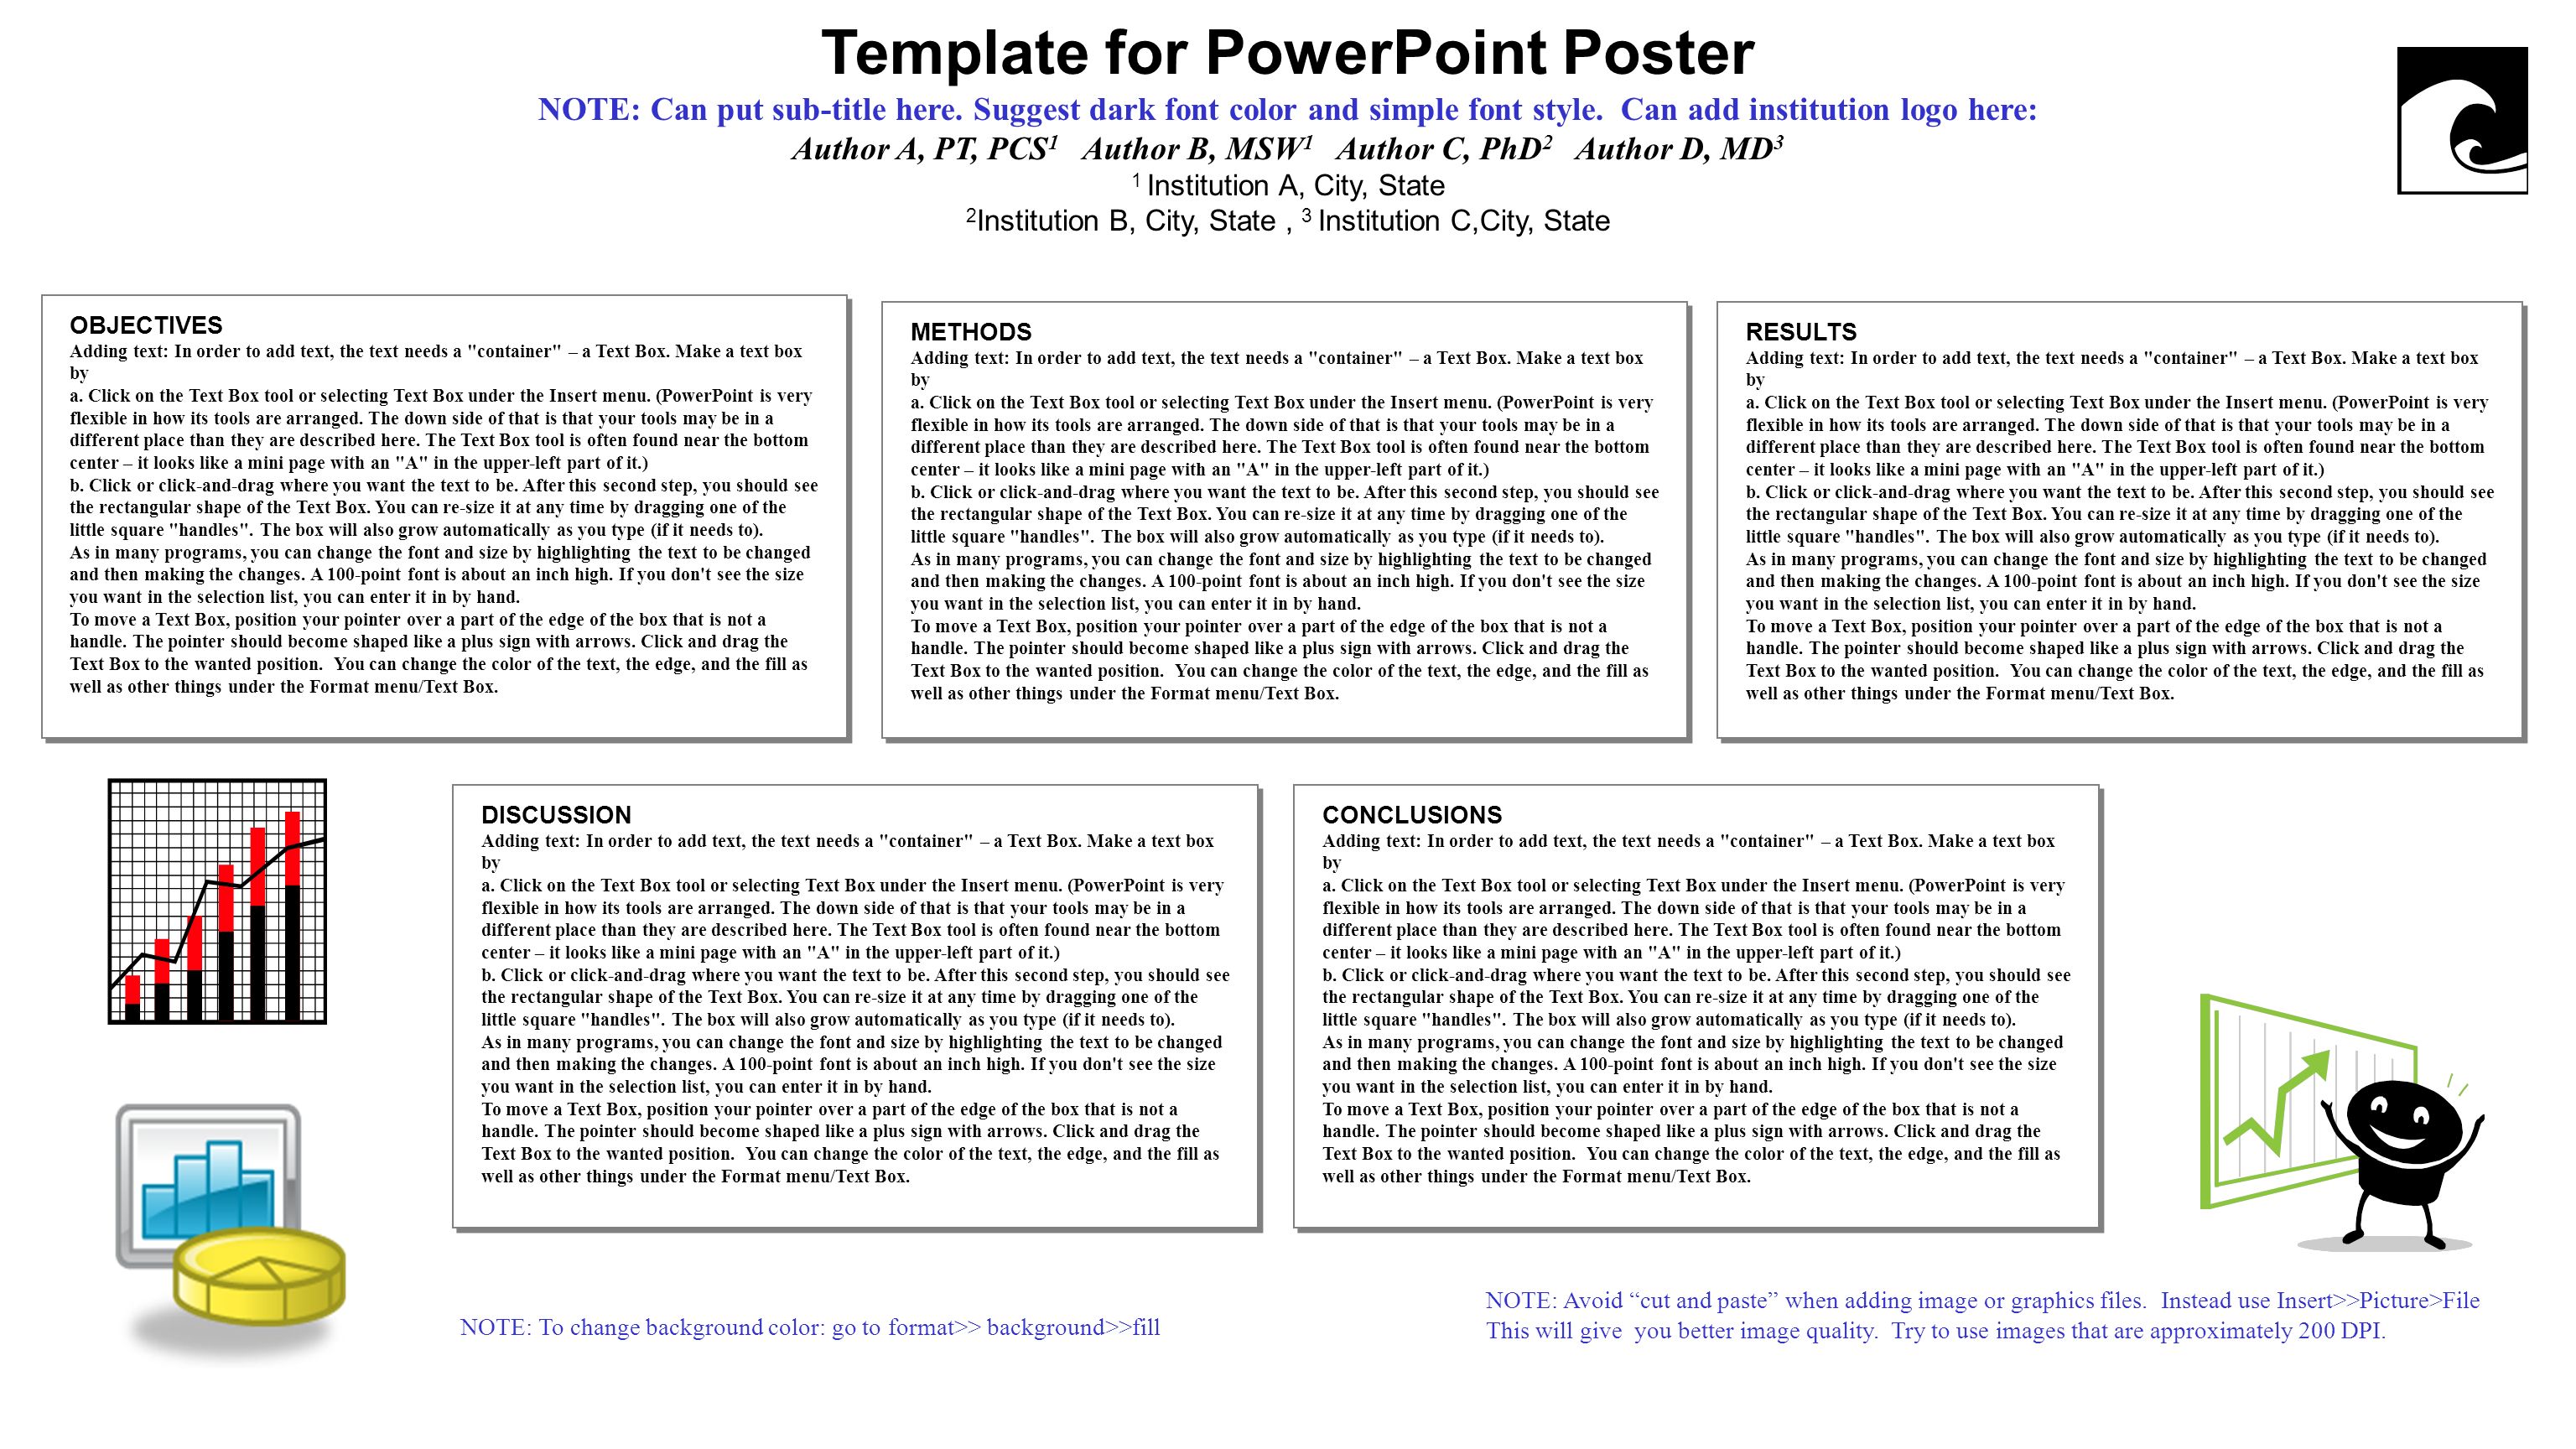 Template for PowerPoint Poster NOTE: Can put sub-title here.